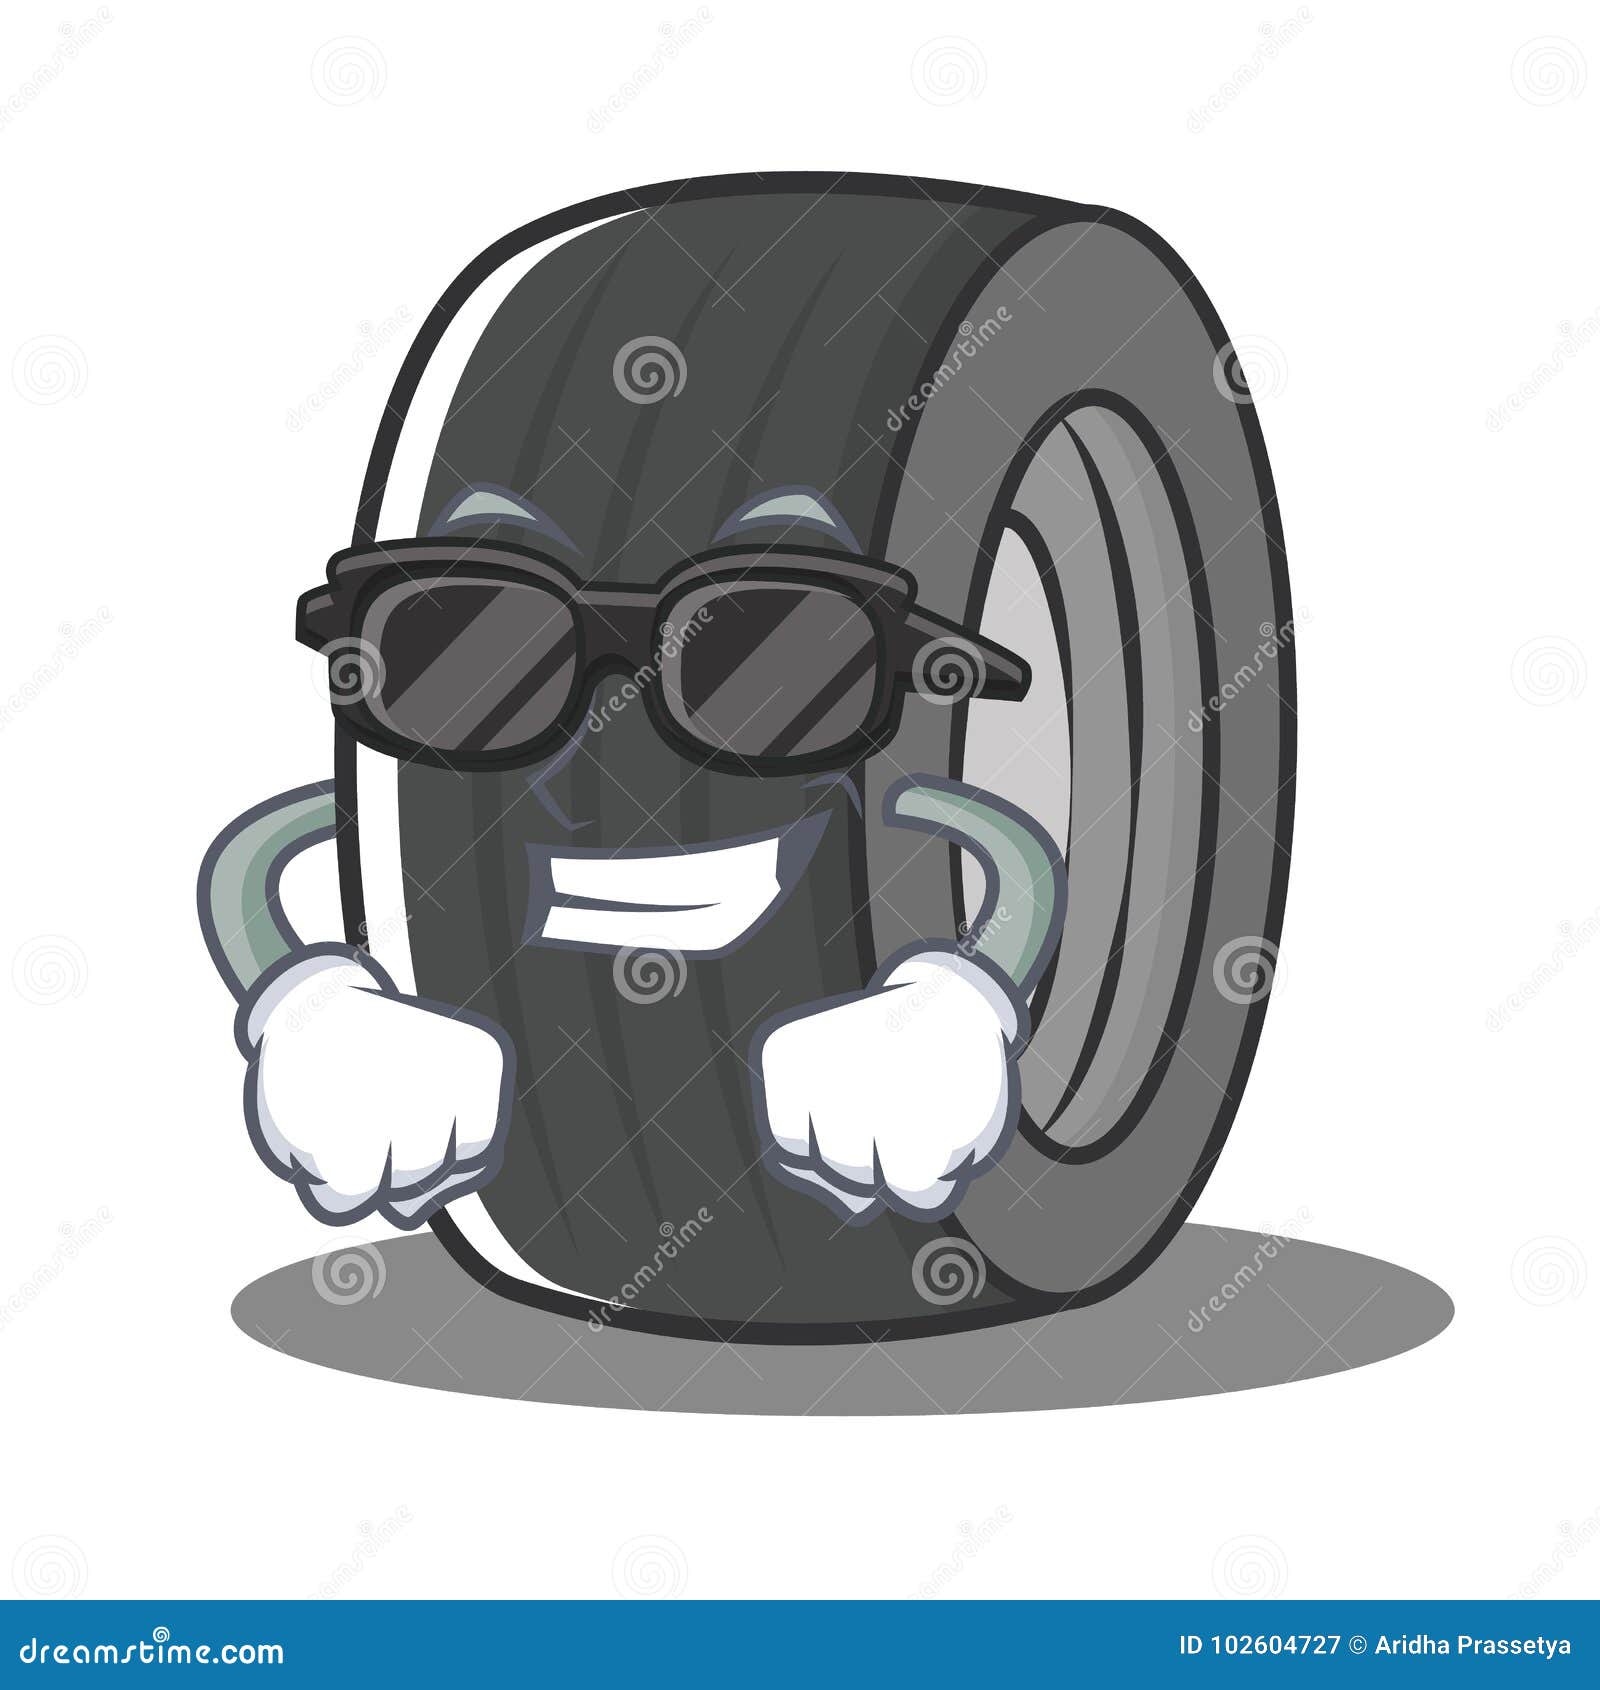 Super Cool Tire Character Cartoon Style Stock Vector - Illustration of ...